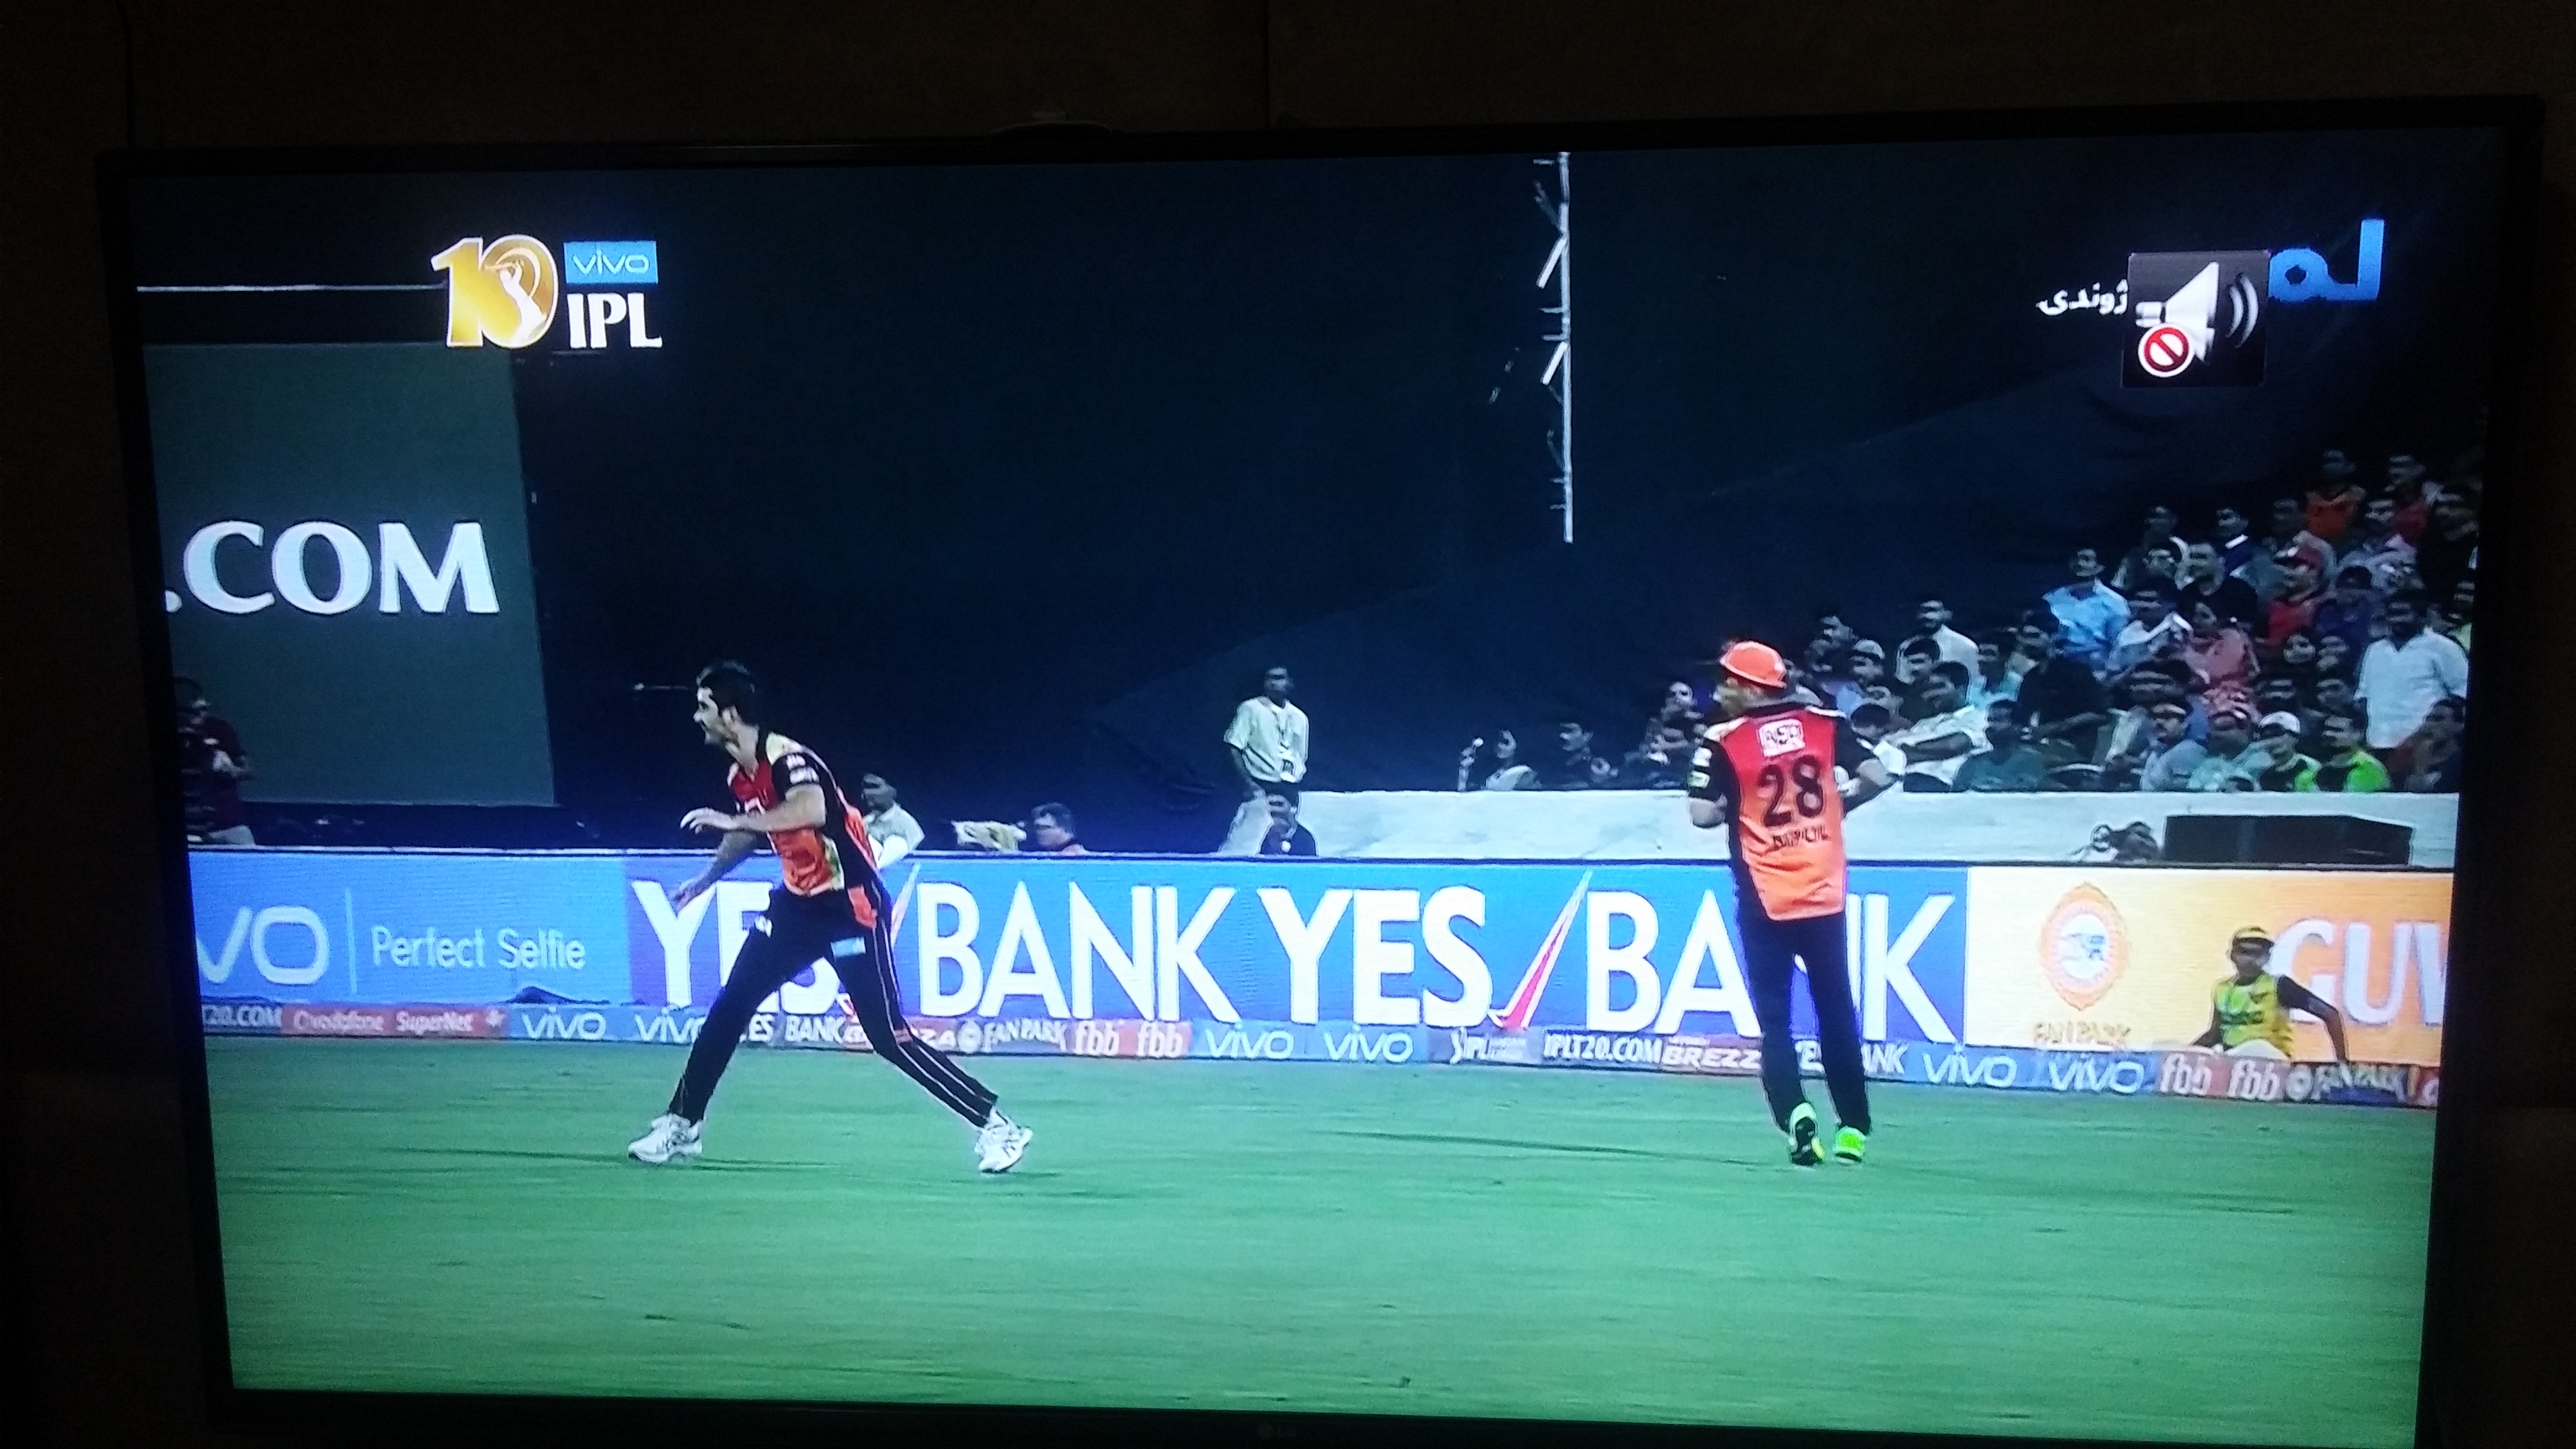 One thing more ur tv output setting should be full 1080i 60fps for best result. Check this pic of ipl match. <br />Channel lamar 52.5